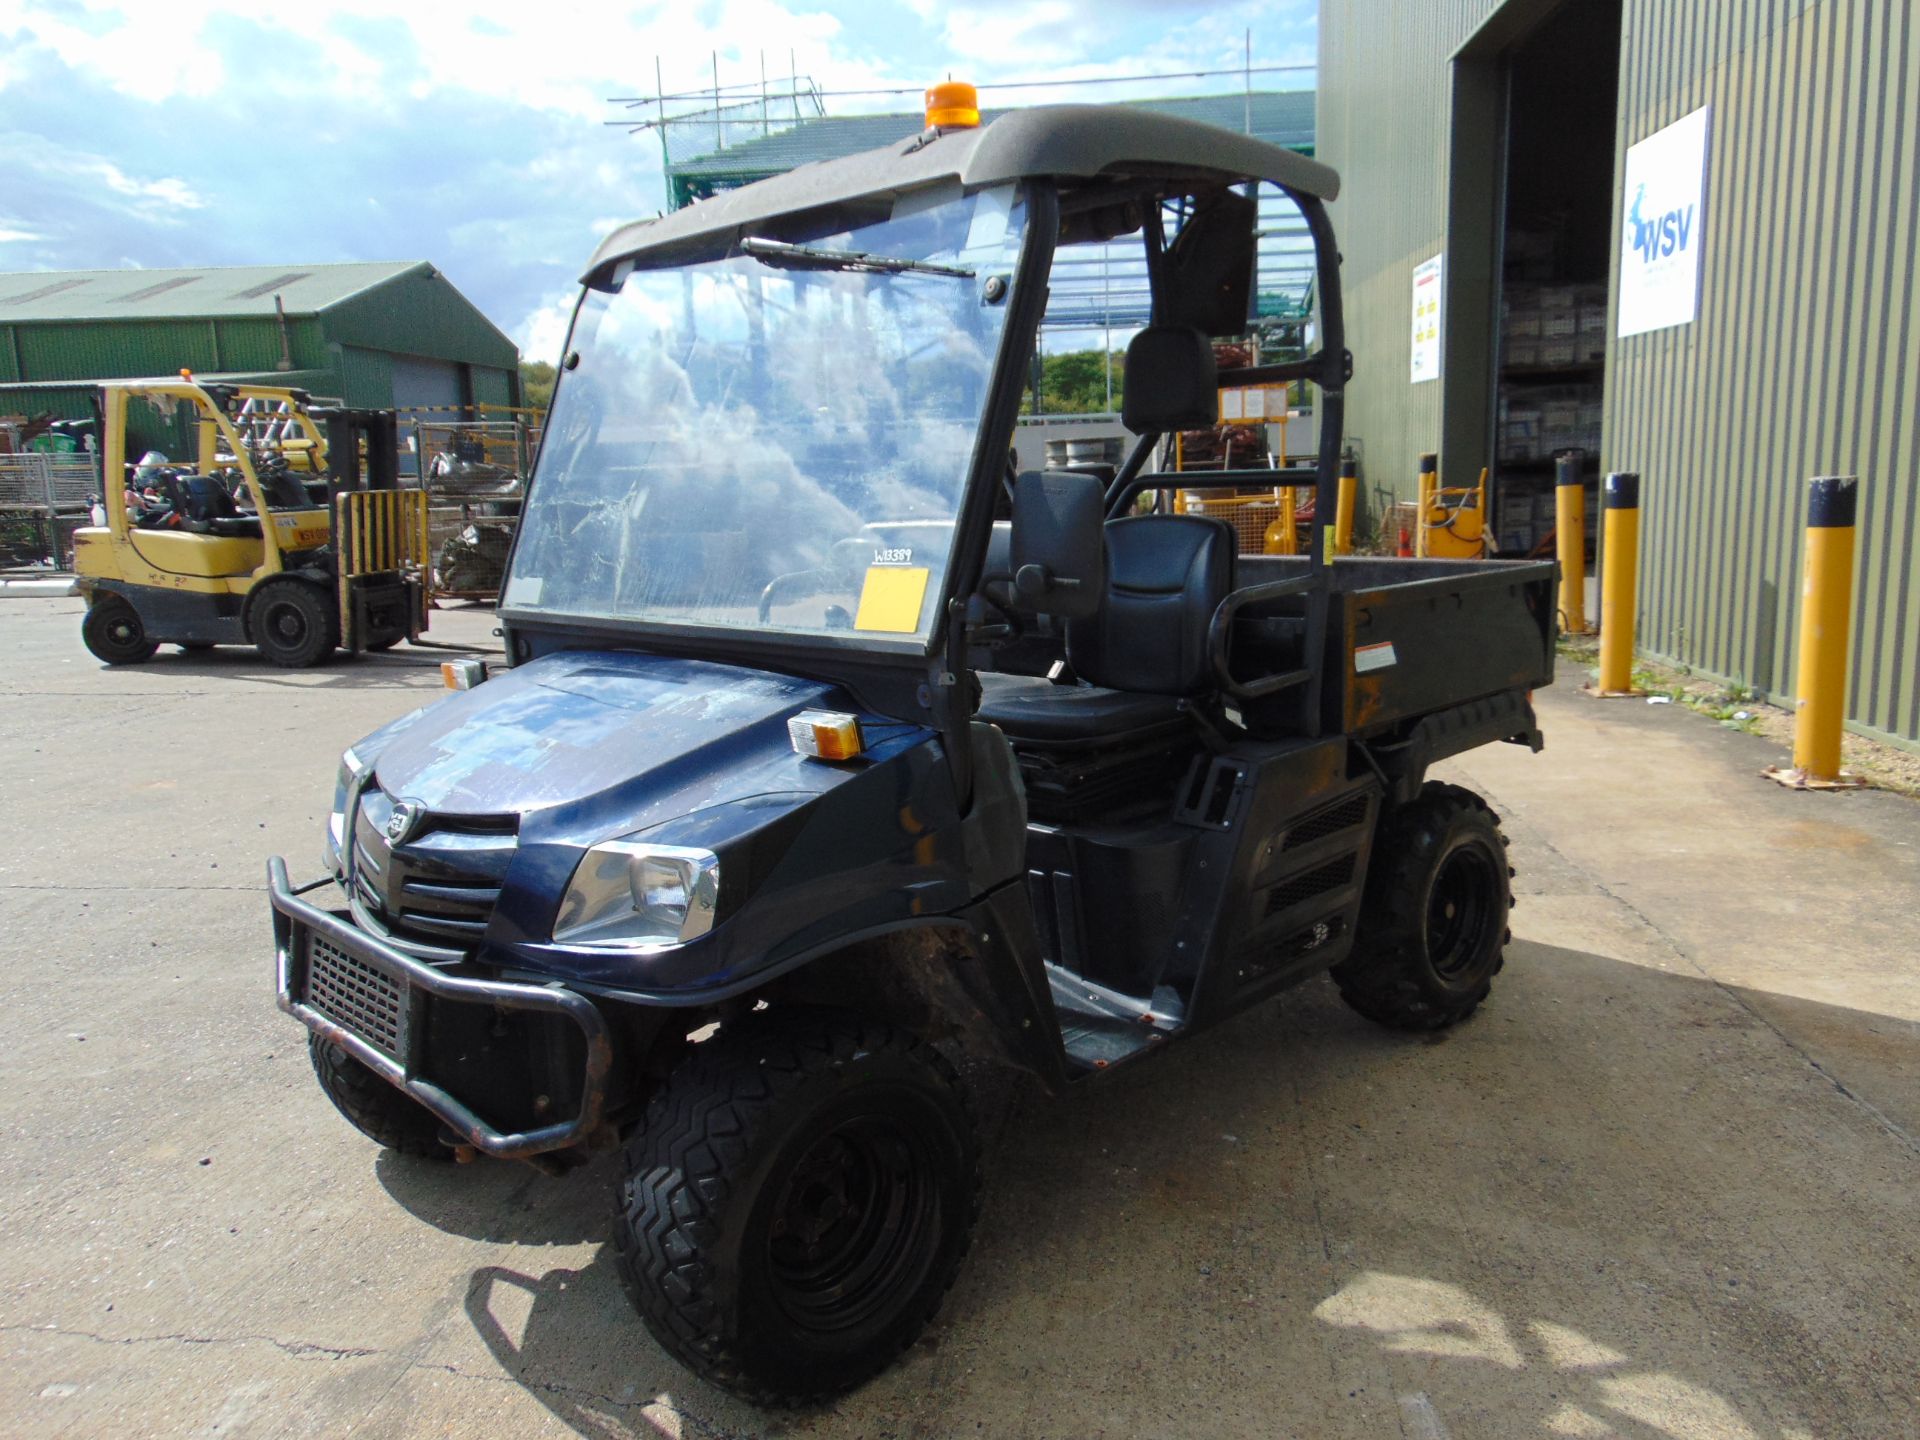 2014 Cushman XD1600 4x4 Diesel Utility Vehicle Showing 1198 hrs - Image 4 of 18